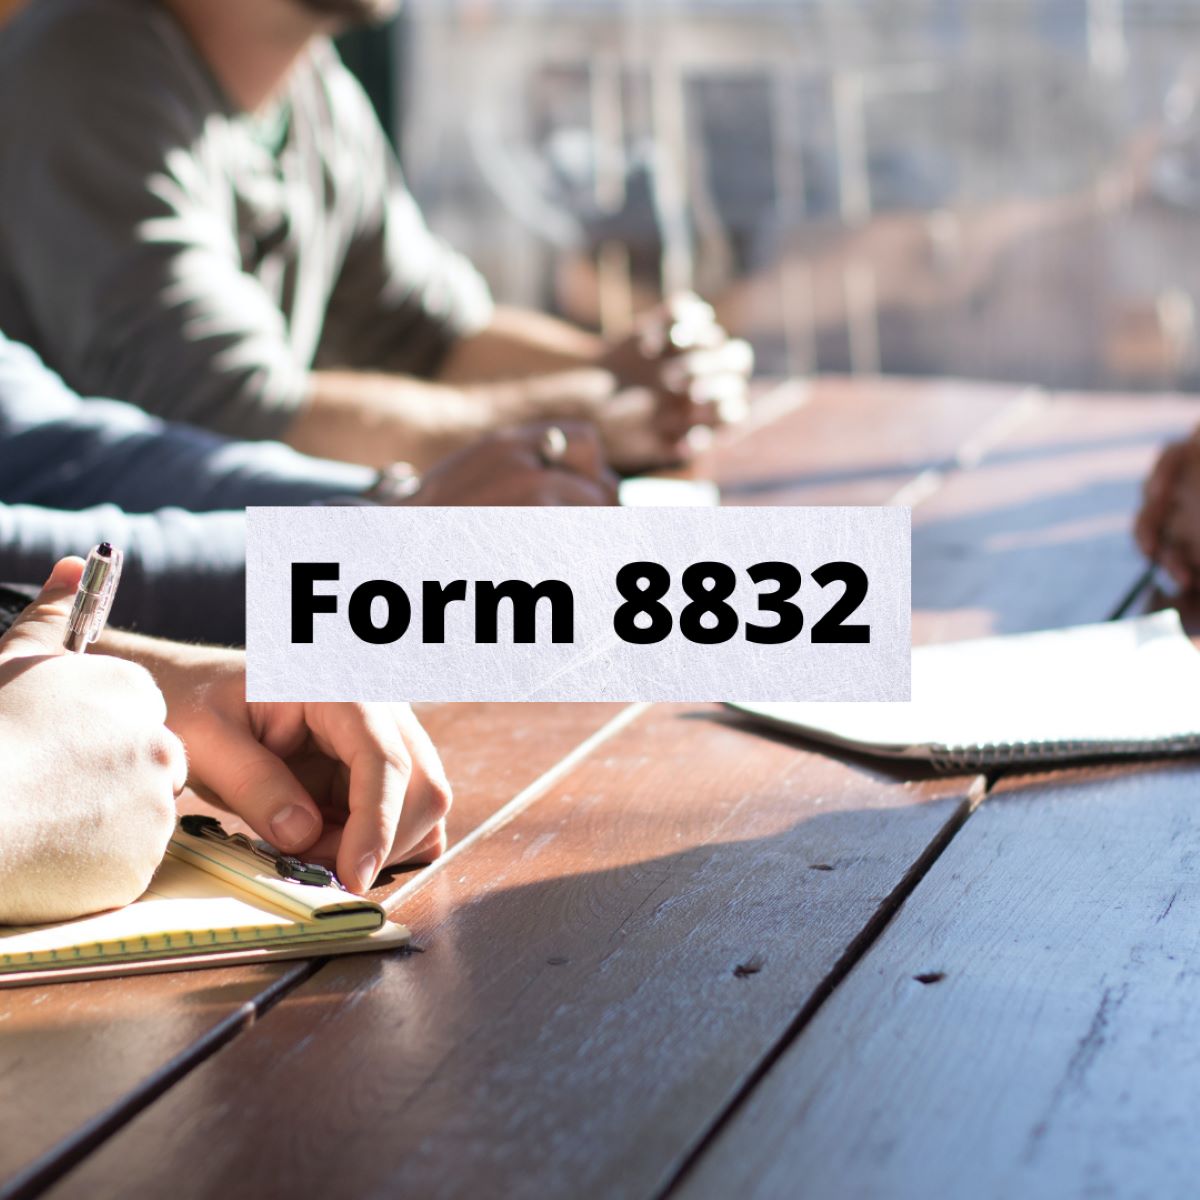 What Is IRS Form 8832 Used For?